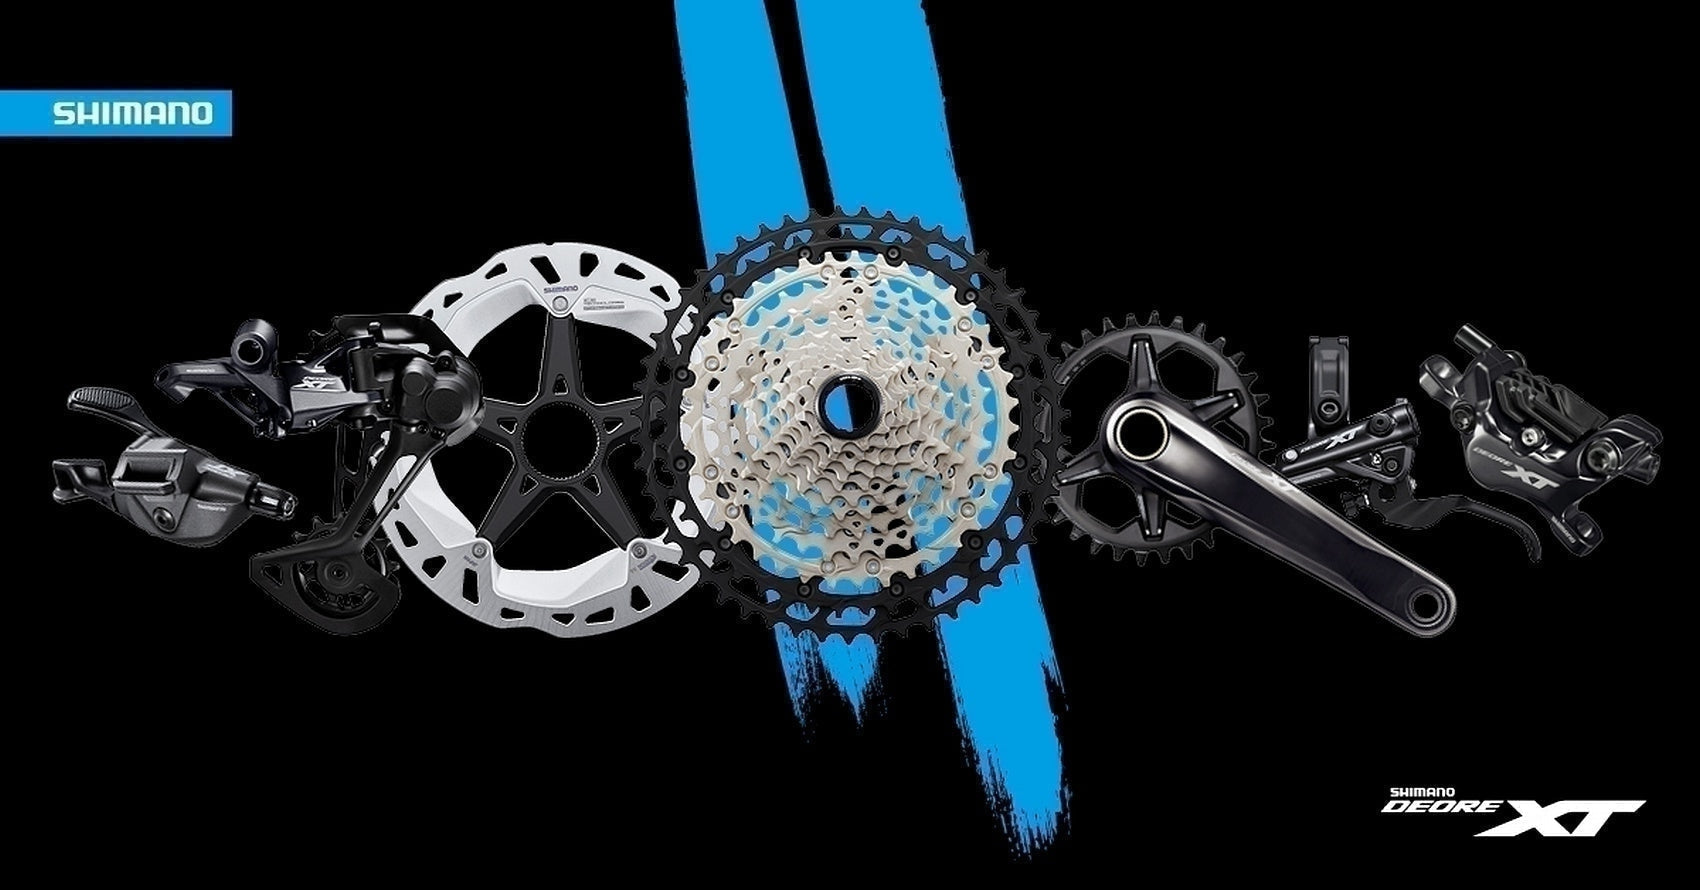 Shimano XT M8100 12-speed groupset, all you need to know.